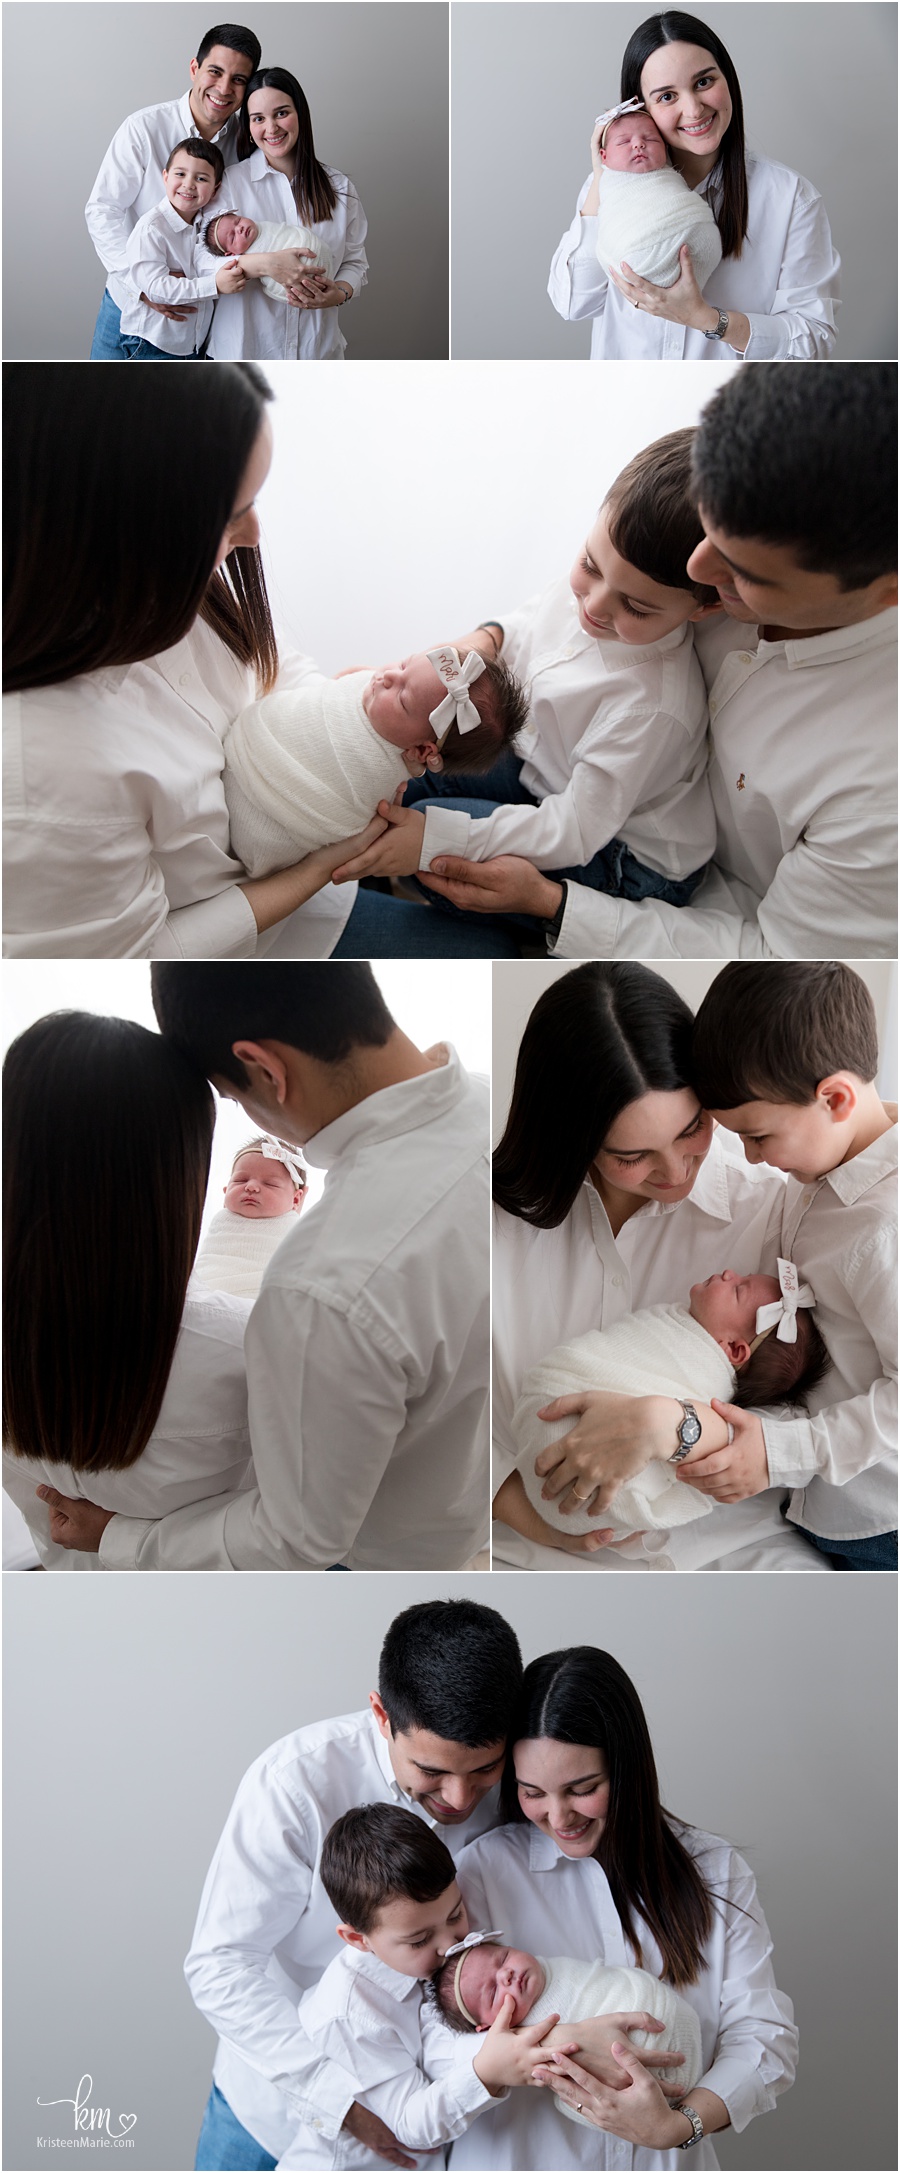 newborn photography family poses - white shirts and backdrop